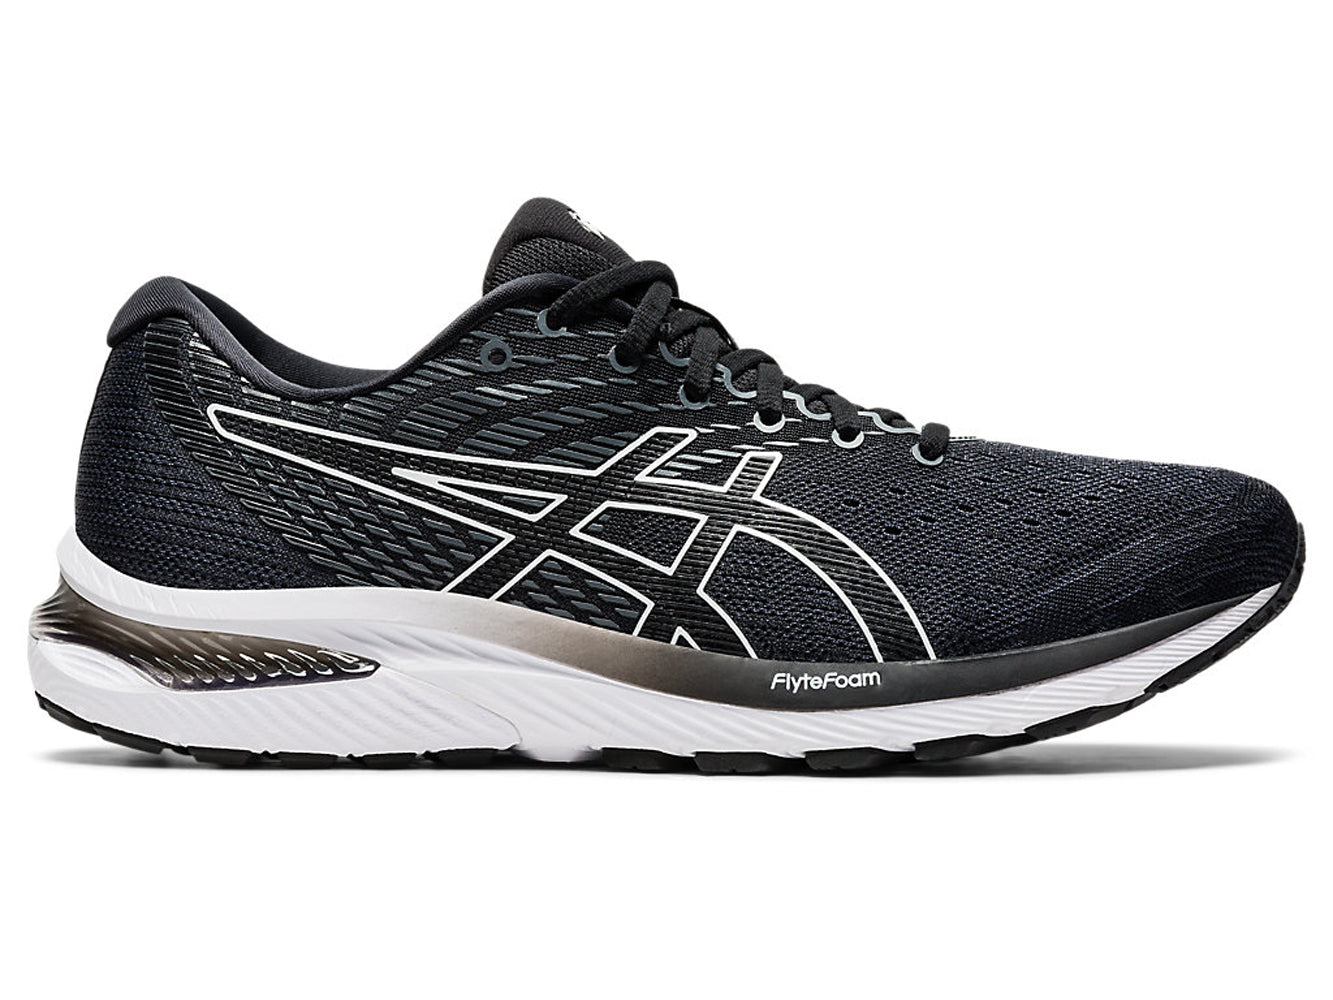 Men's Asics GEL-Cumulus 22 Running Shoe in Carrier Grey/Black from the side